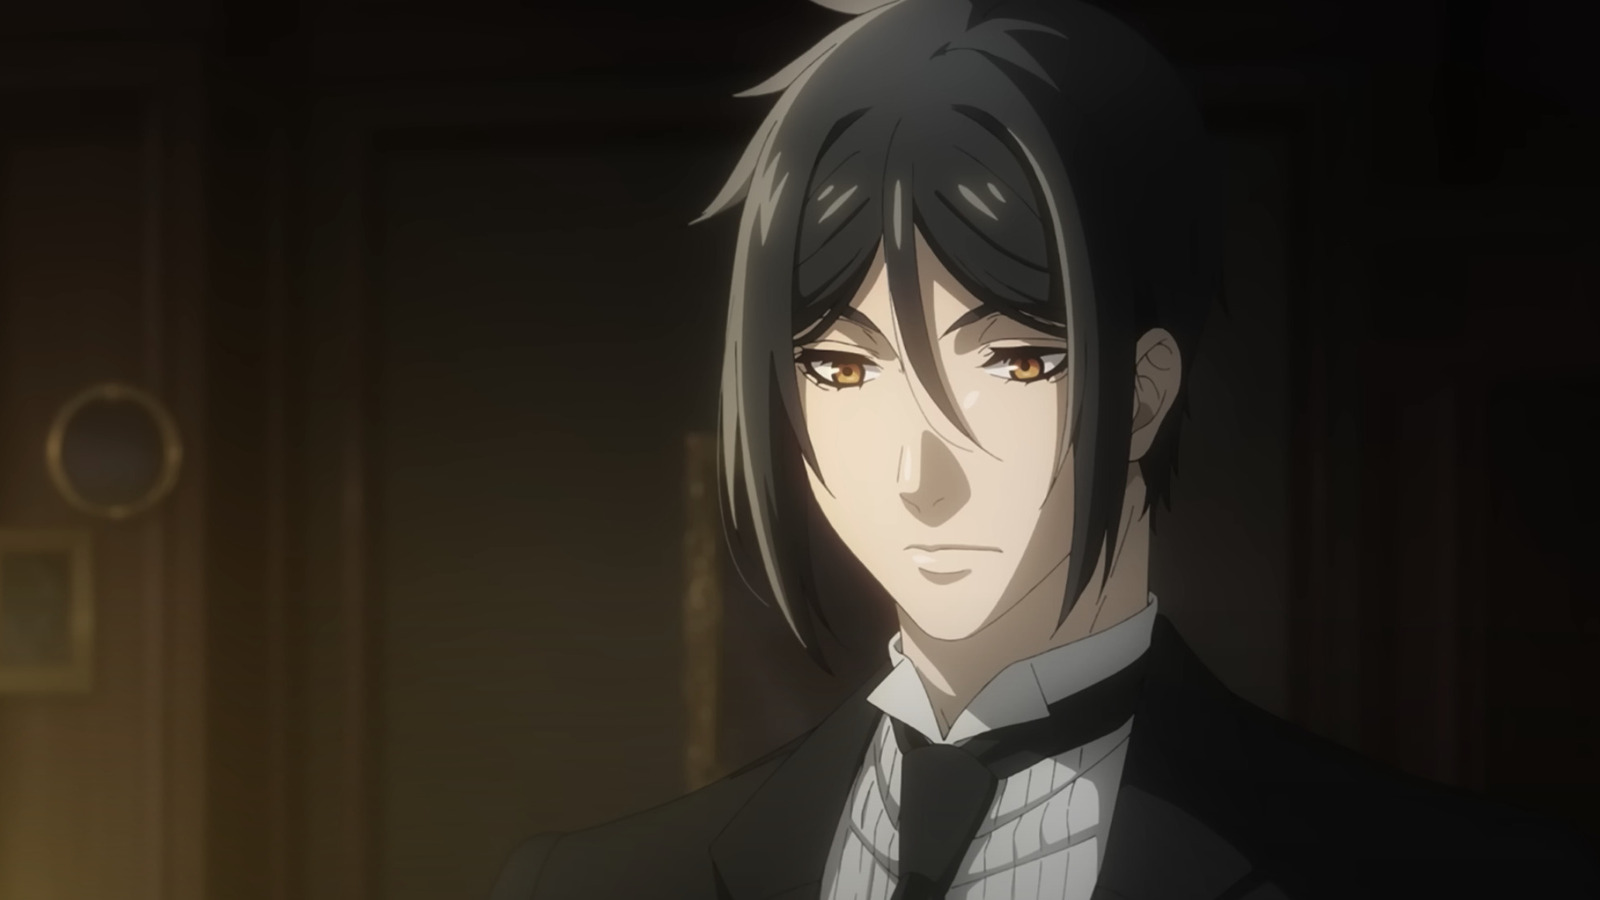 Black Butler Anime Revival Is Officially Happening! Watch The Trailer